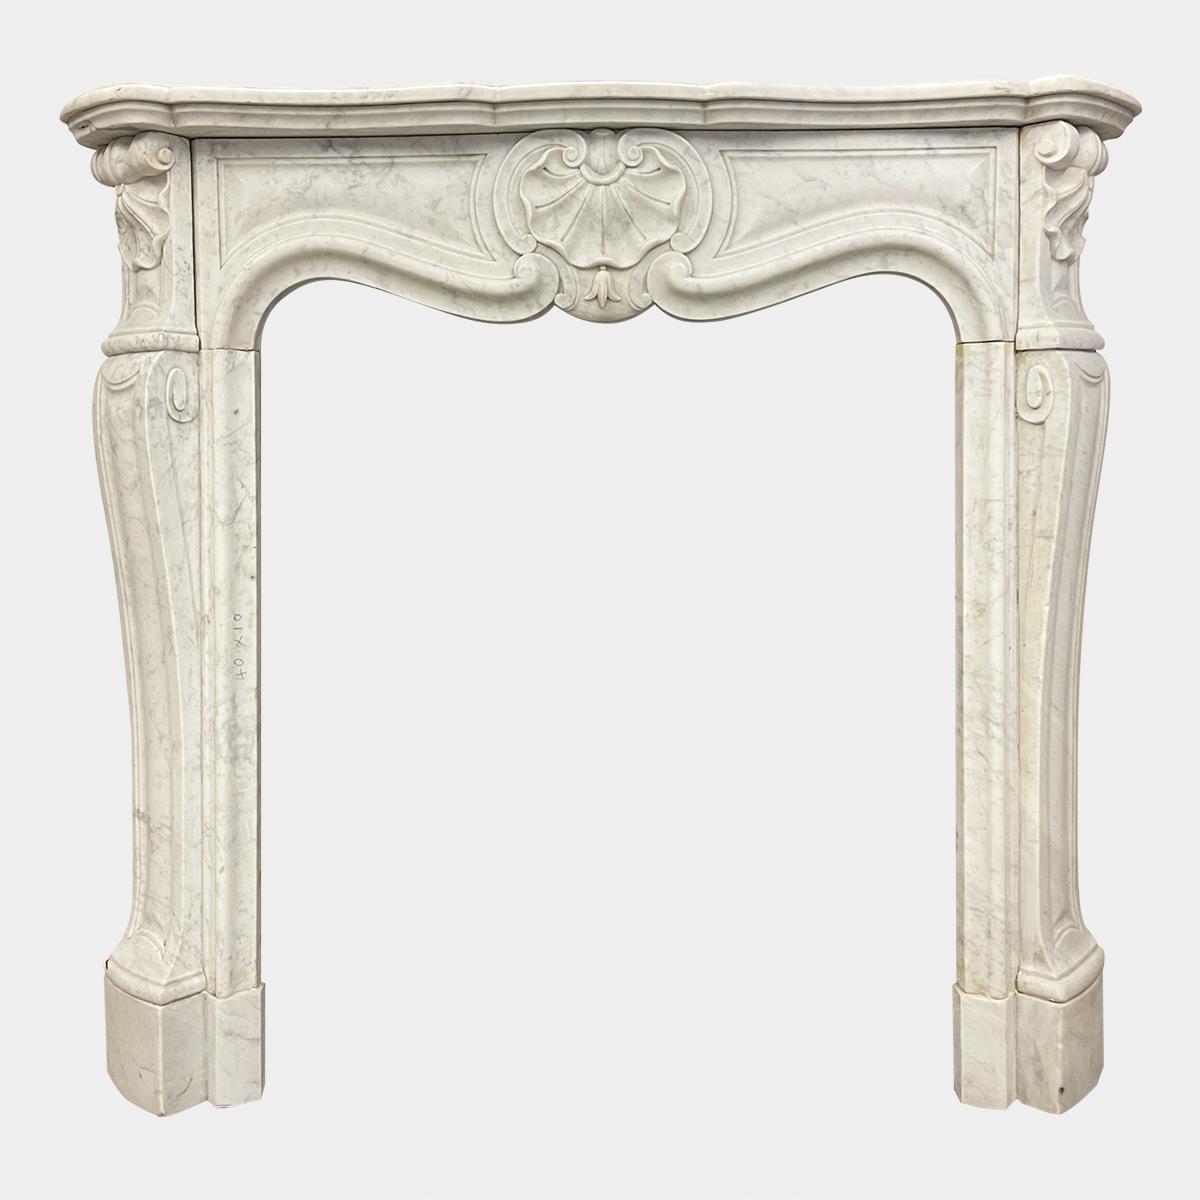 French Carrara Marble Louis XV Style Antique Fireplace Mantel